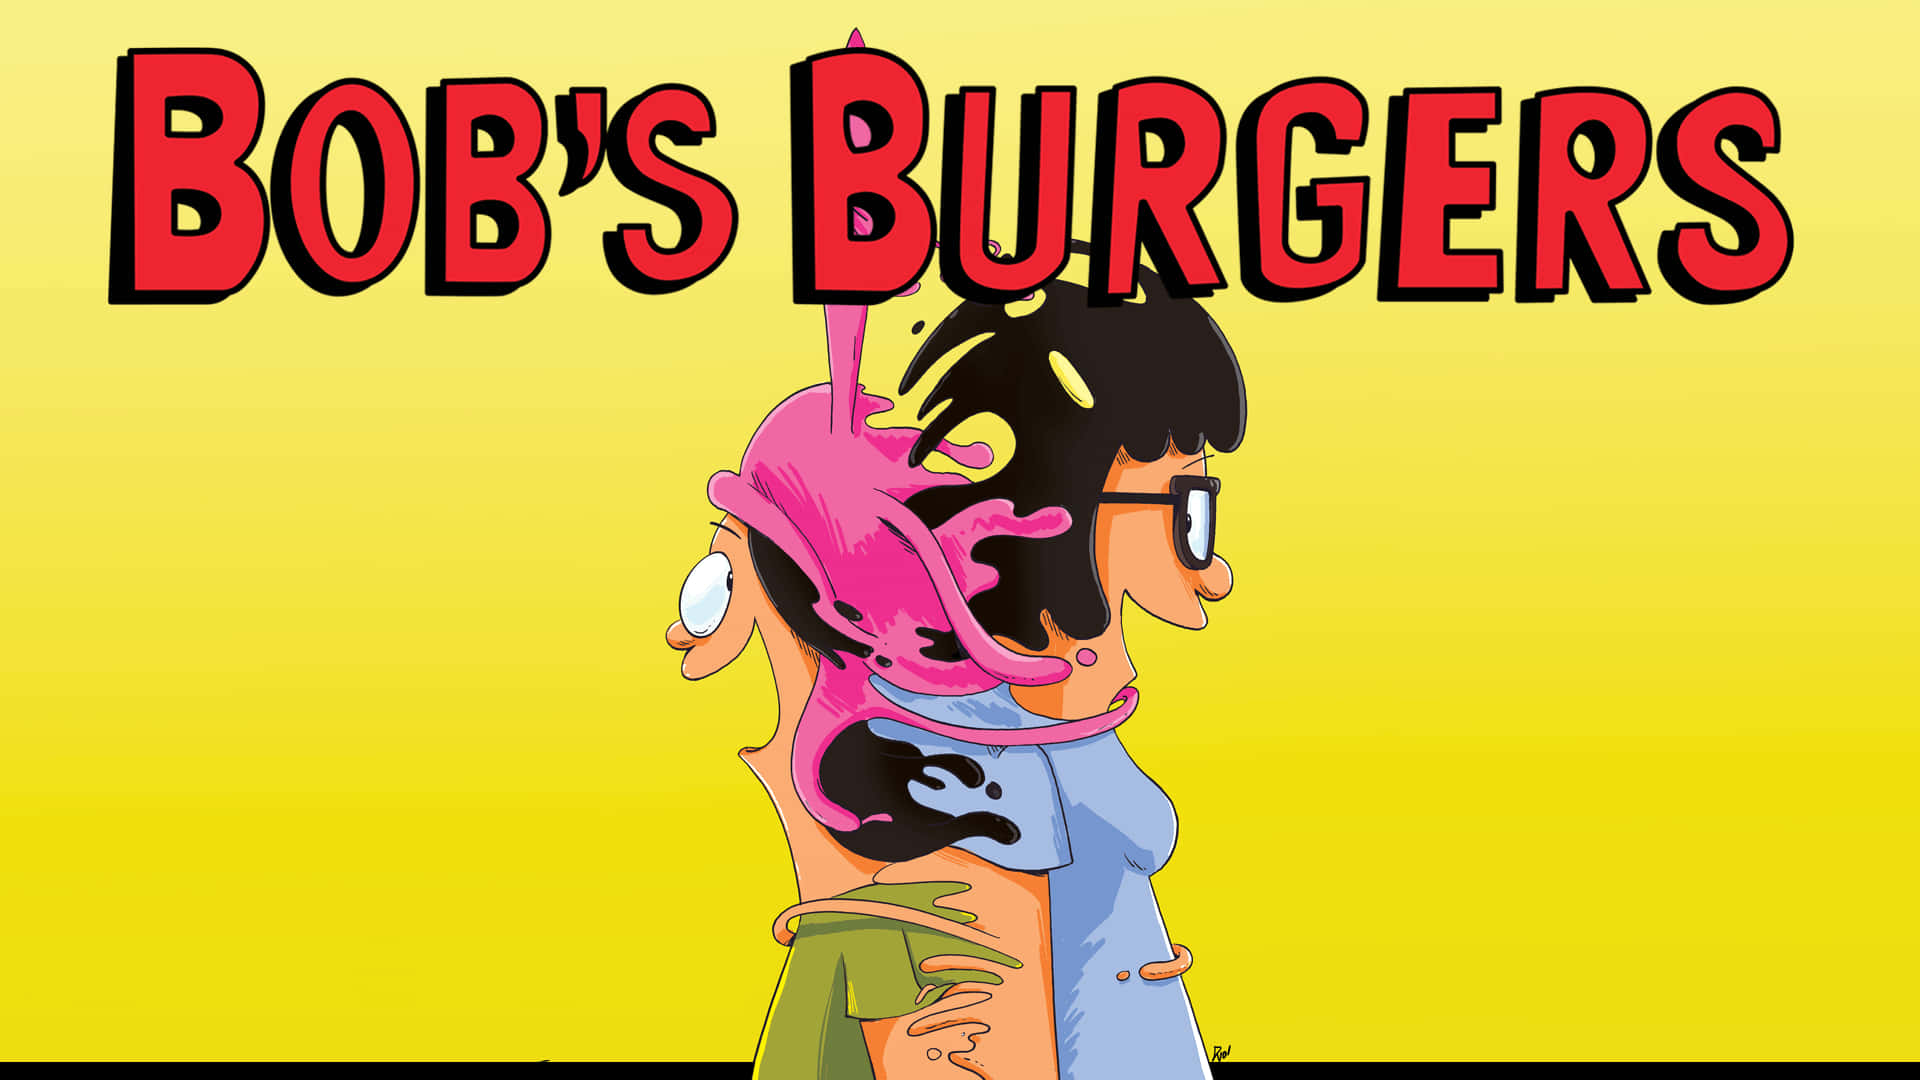 A family-powered culinary venture depicted in Bob's Burgers Background.